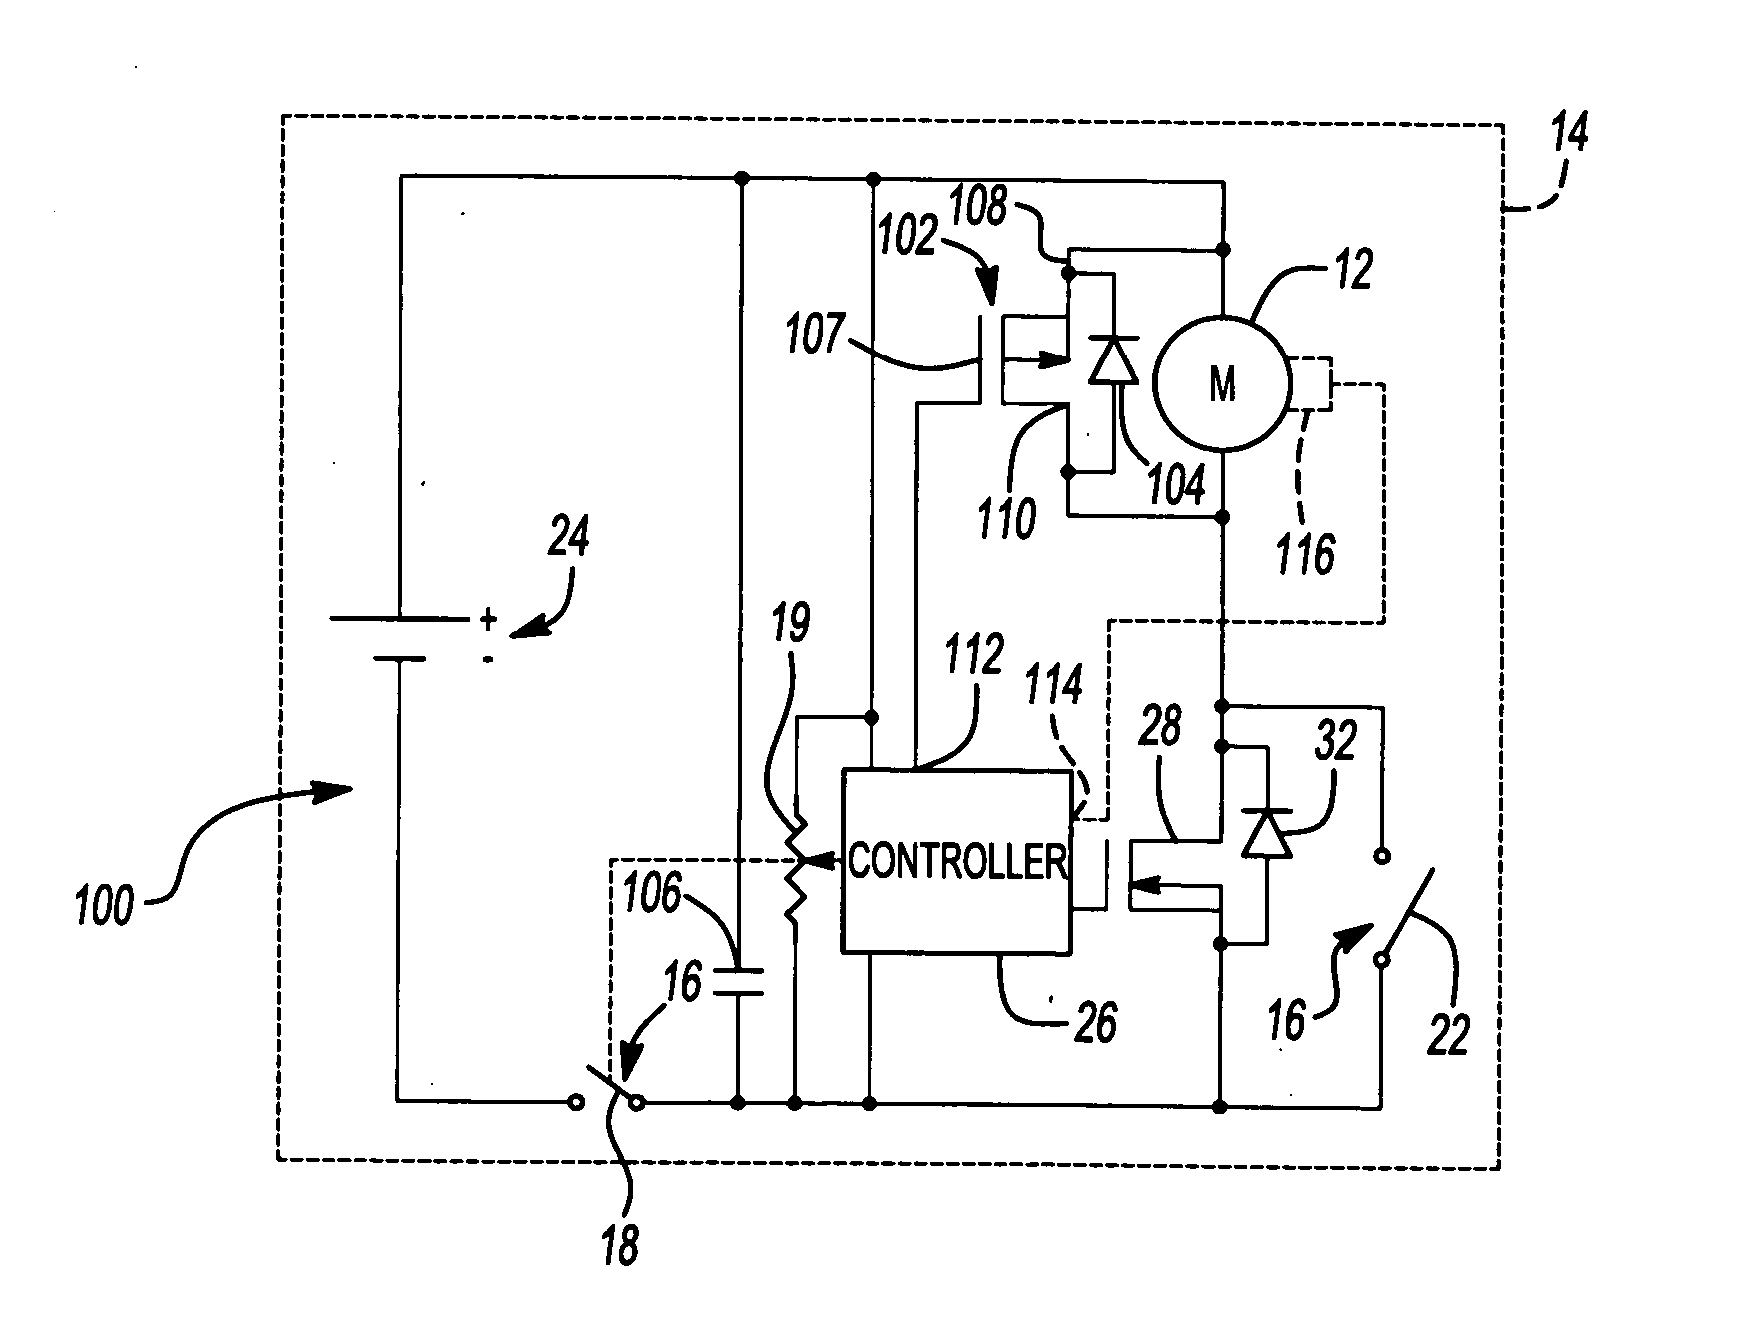 Method and device for braking a motor